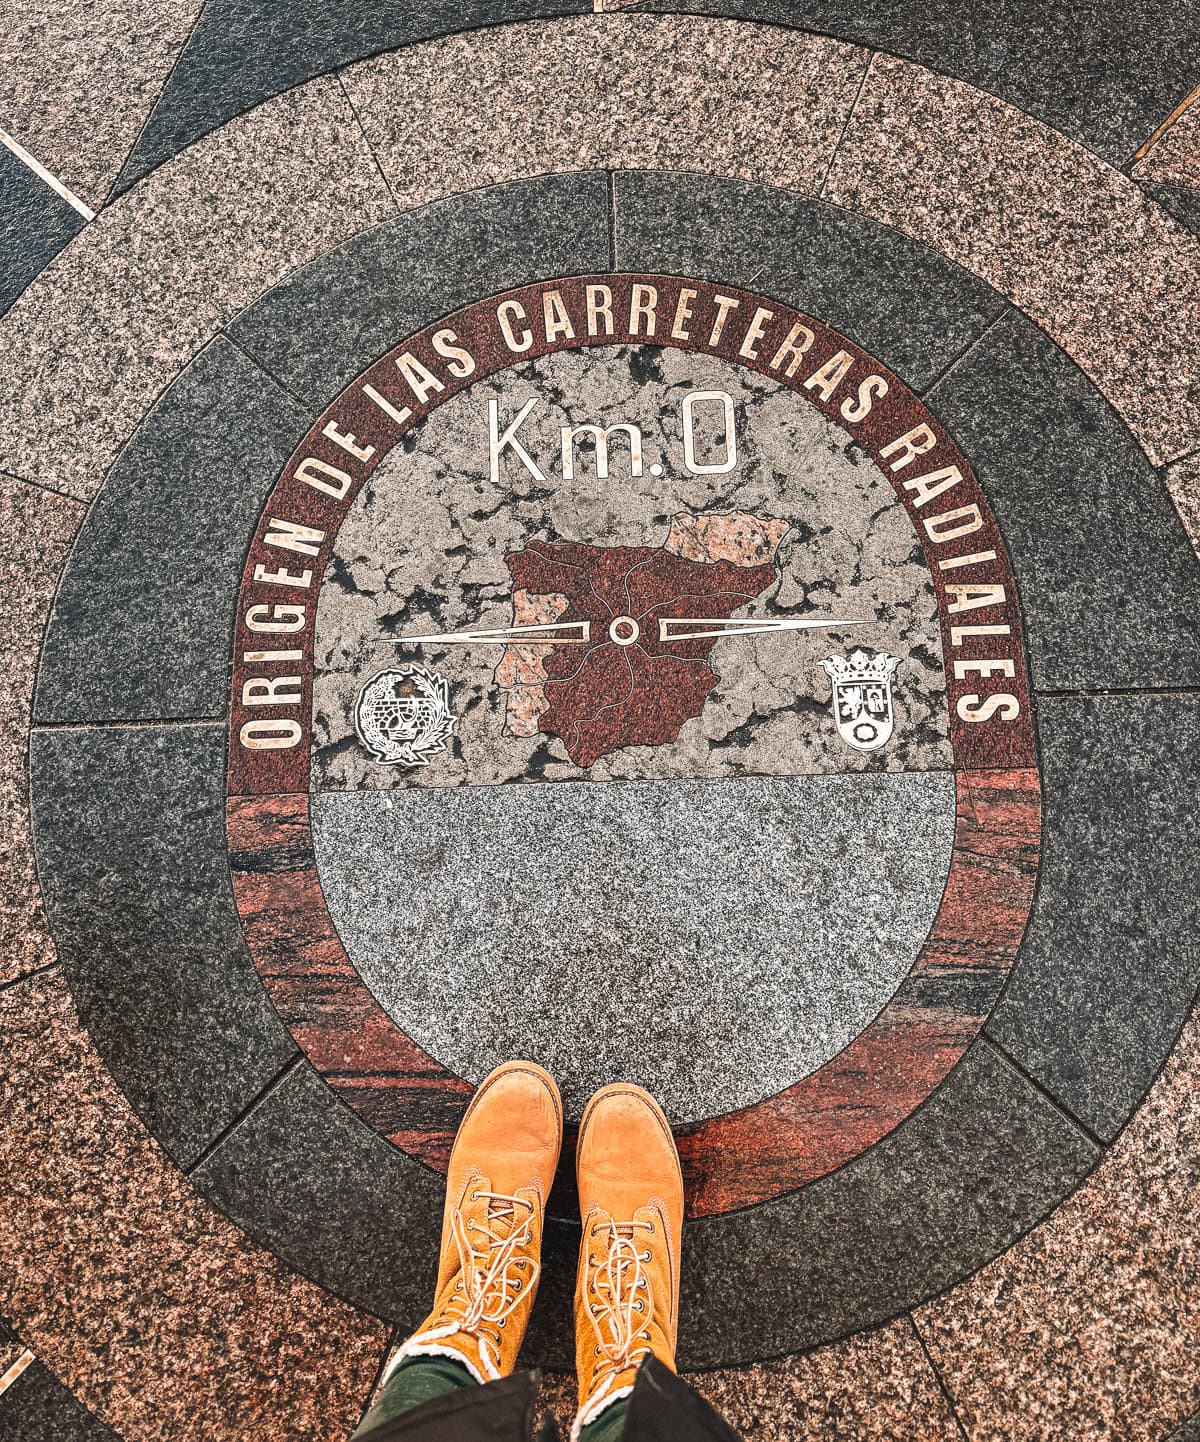 A pair of feet in bright orange shoes stand atop the Km 0 marker in Puerta del Sol, Madrid, the central point from which all distances in Spain are measured, indicating the historic and geographic heart of the country.